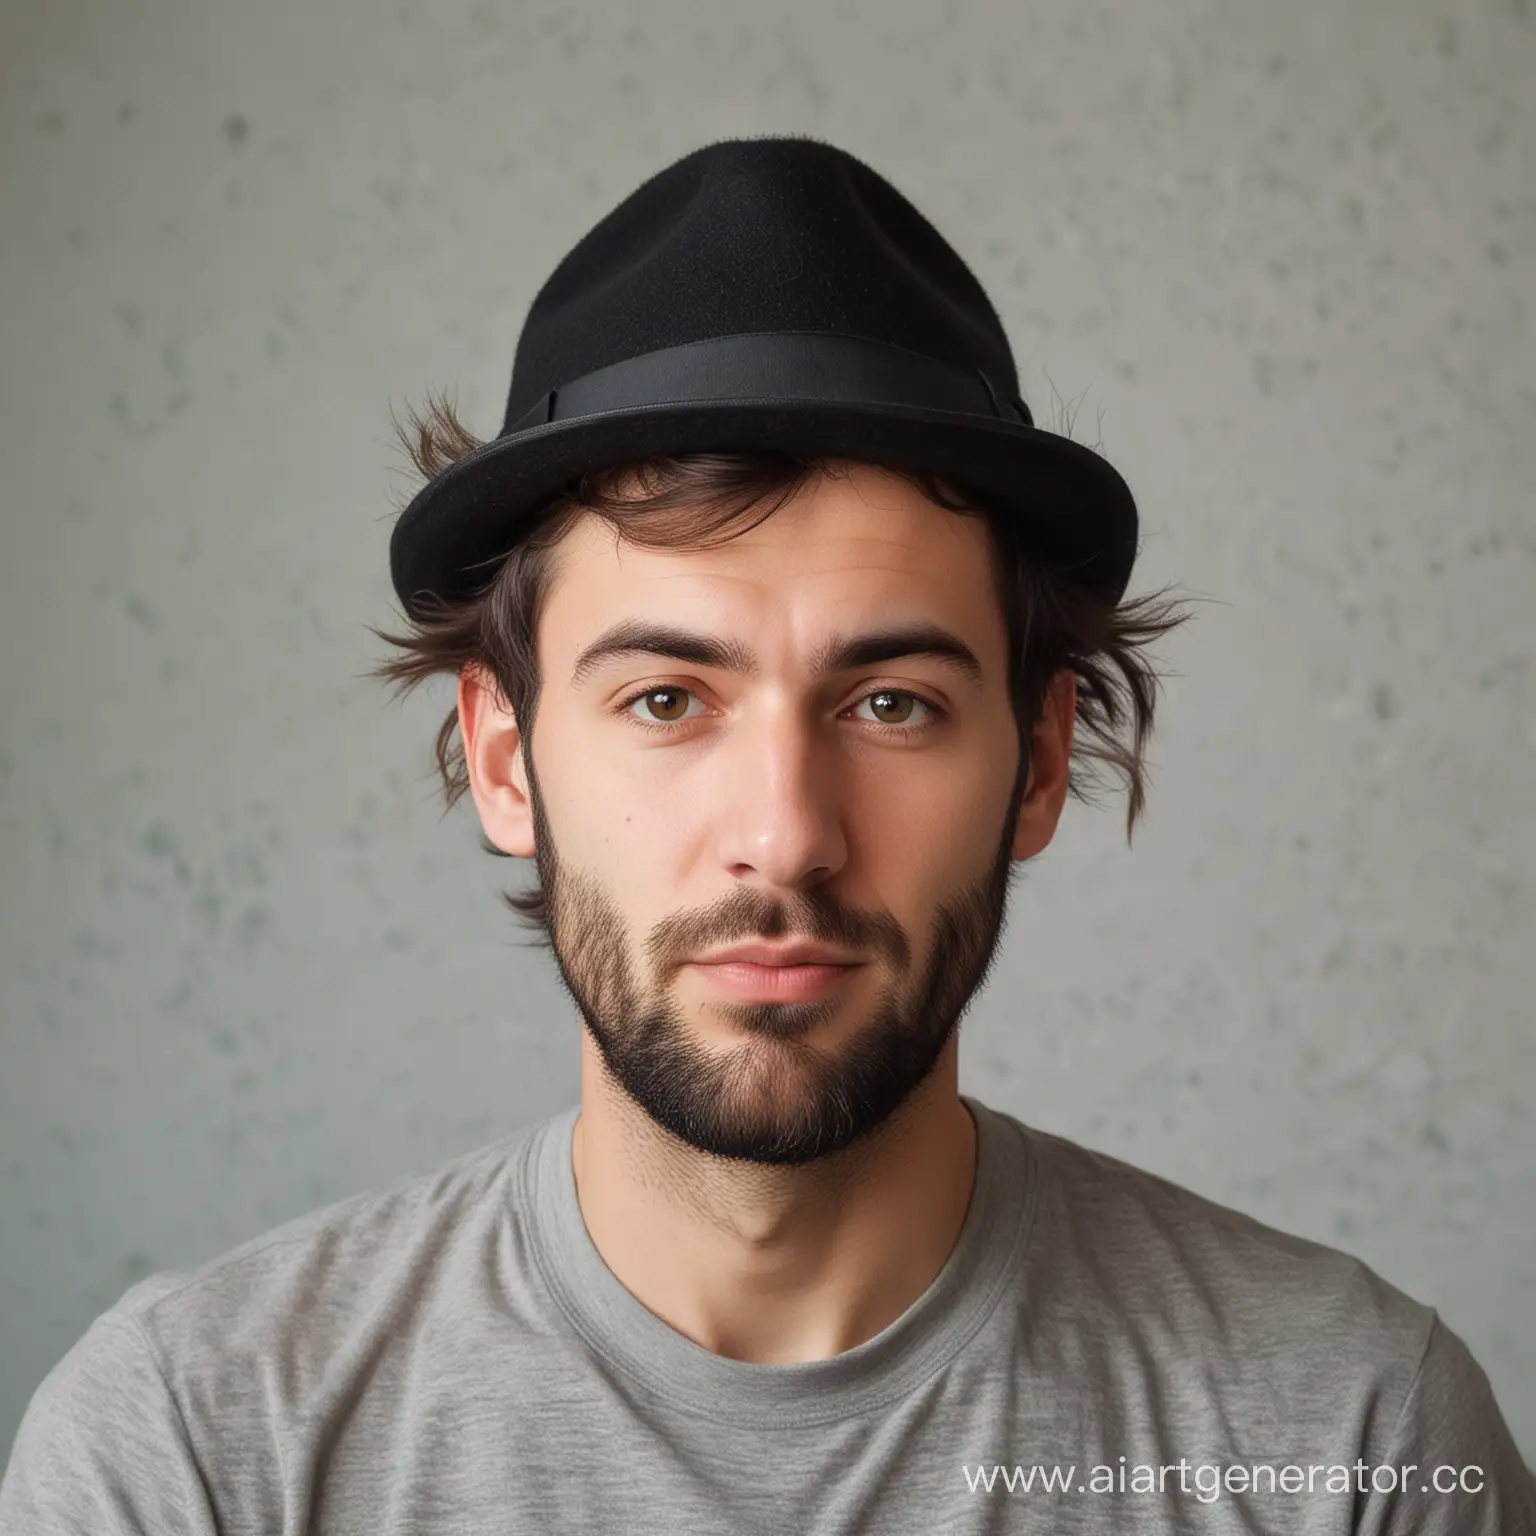 Man-in-Hat-with-Wild-Hair-Sticking-Out